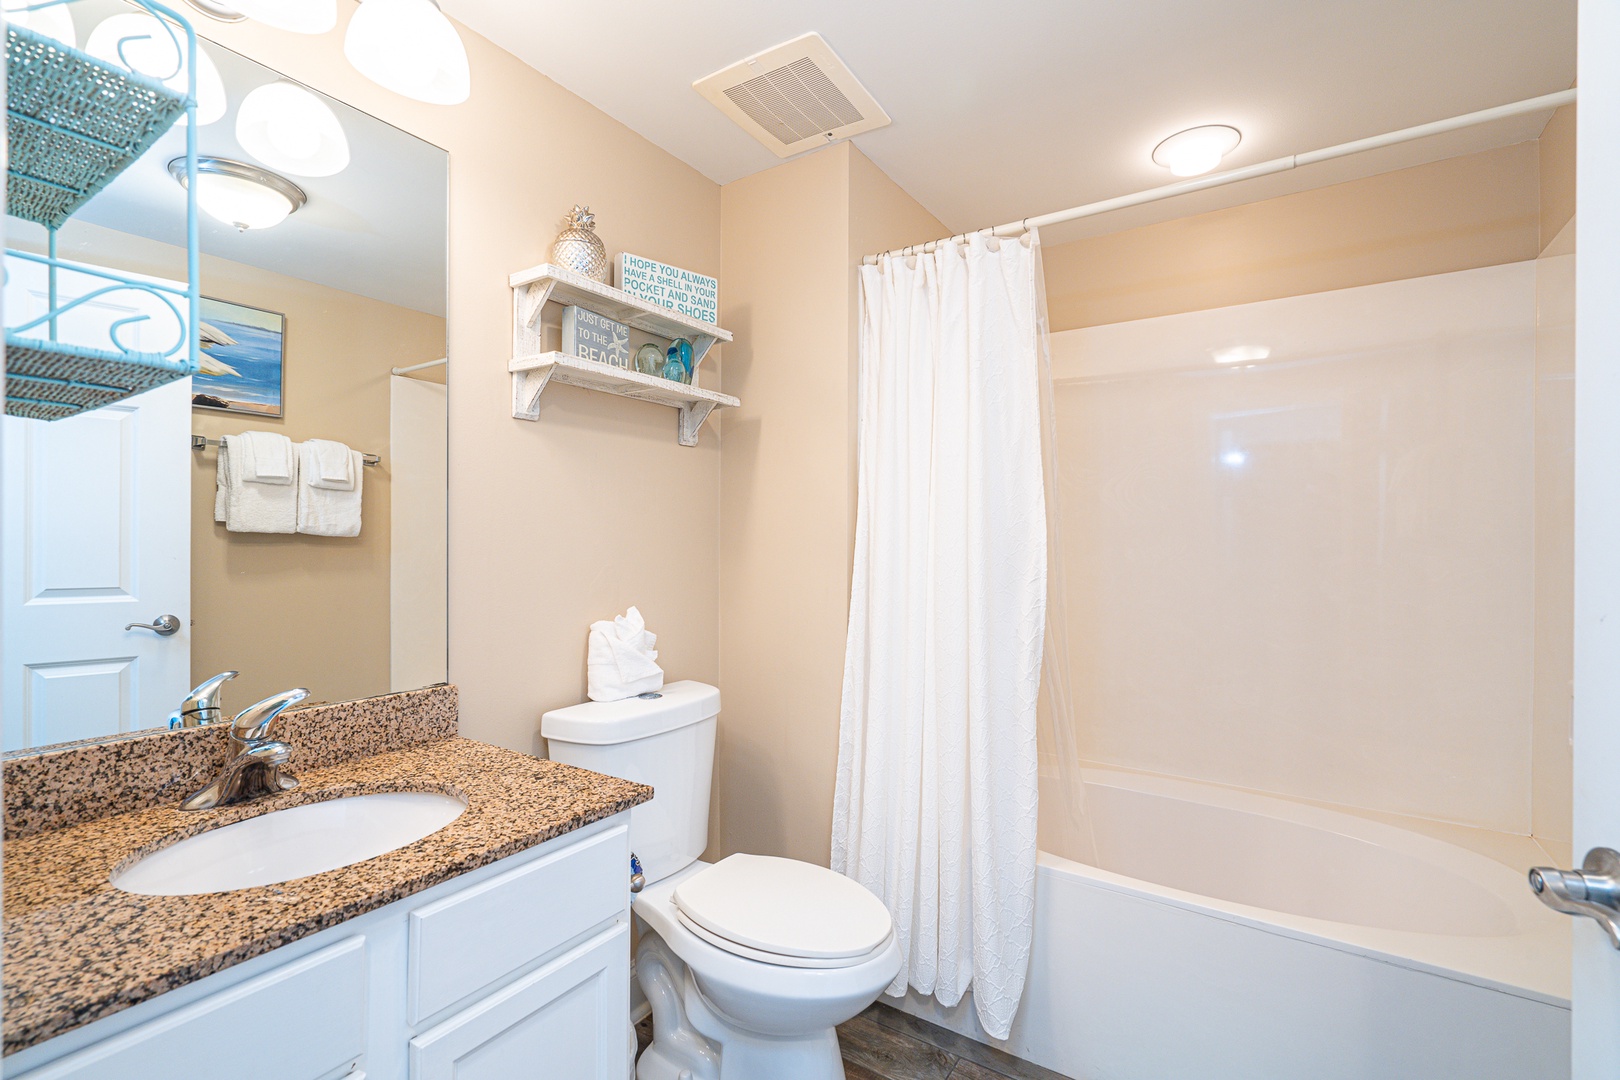 The full shared bathroom contains a single vanity & shower/tub combo